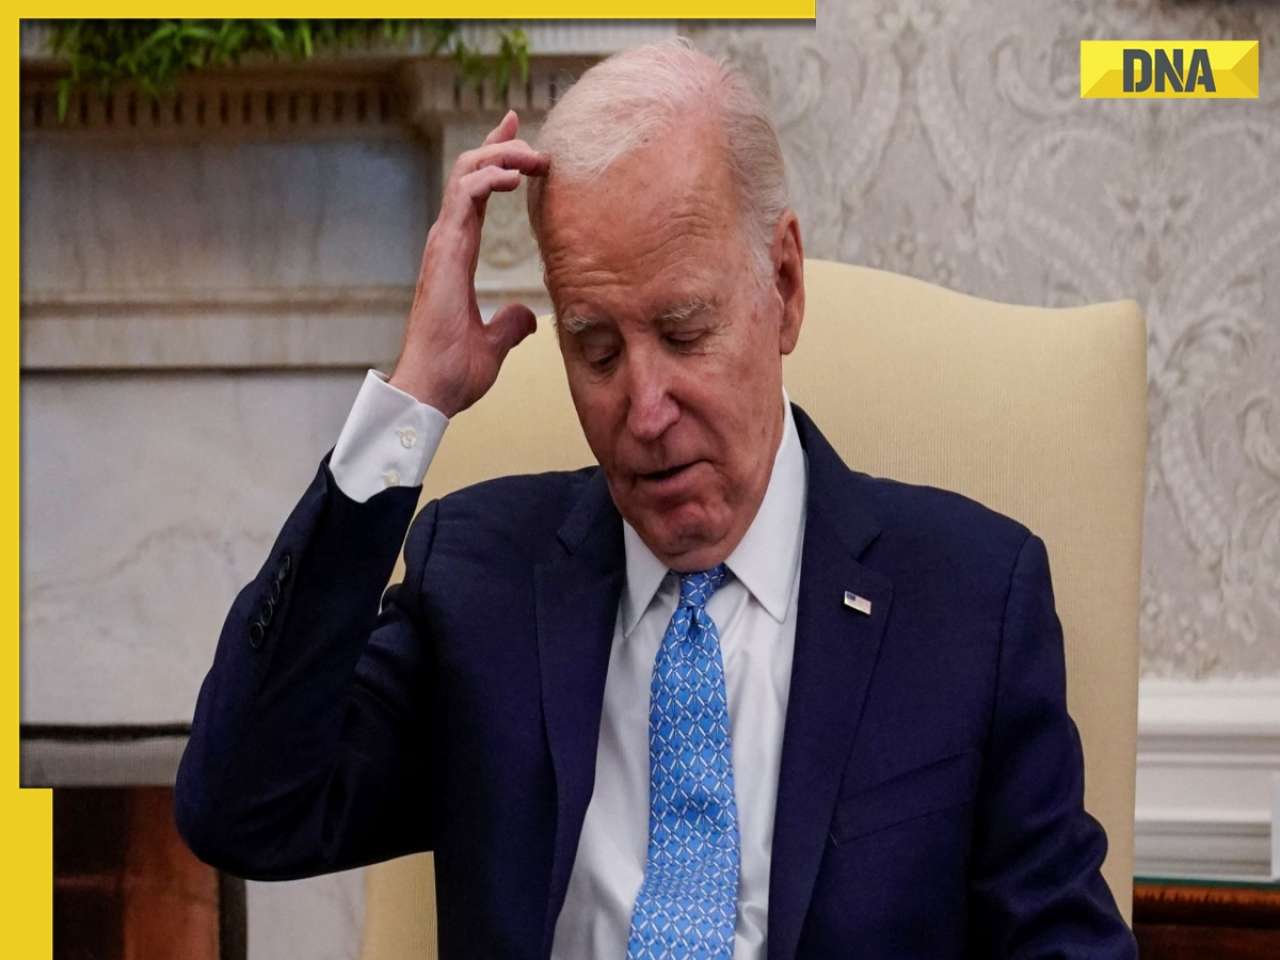 In another gaffe, Joe Biden says he was US 'Vice President' during COVID-19 pandemic, watch viral video